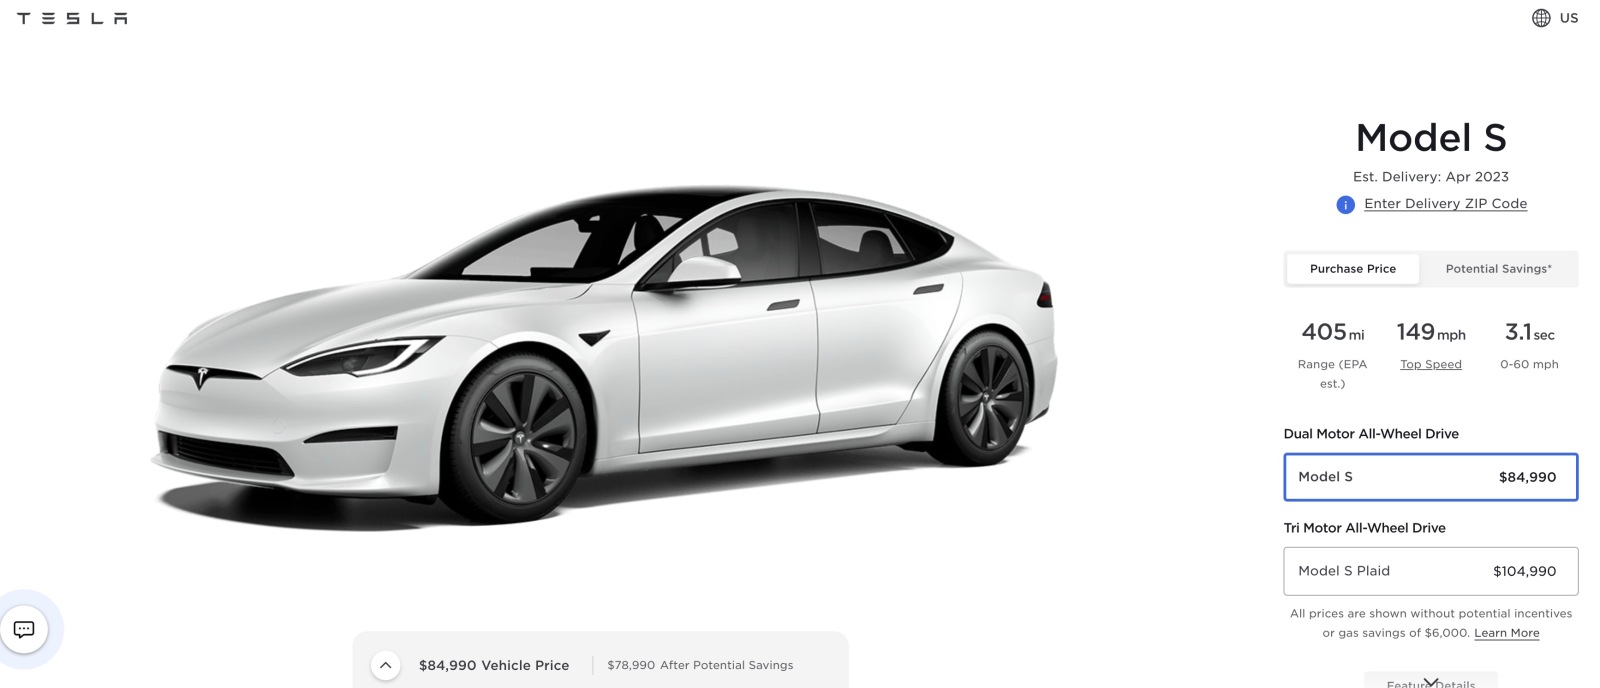 Tesla Model S prices April 2023 - Tesla Surprises the Market with Series of Price Reductions on Entire Car Lineup to Keep Up with Competition